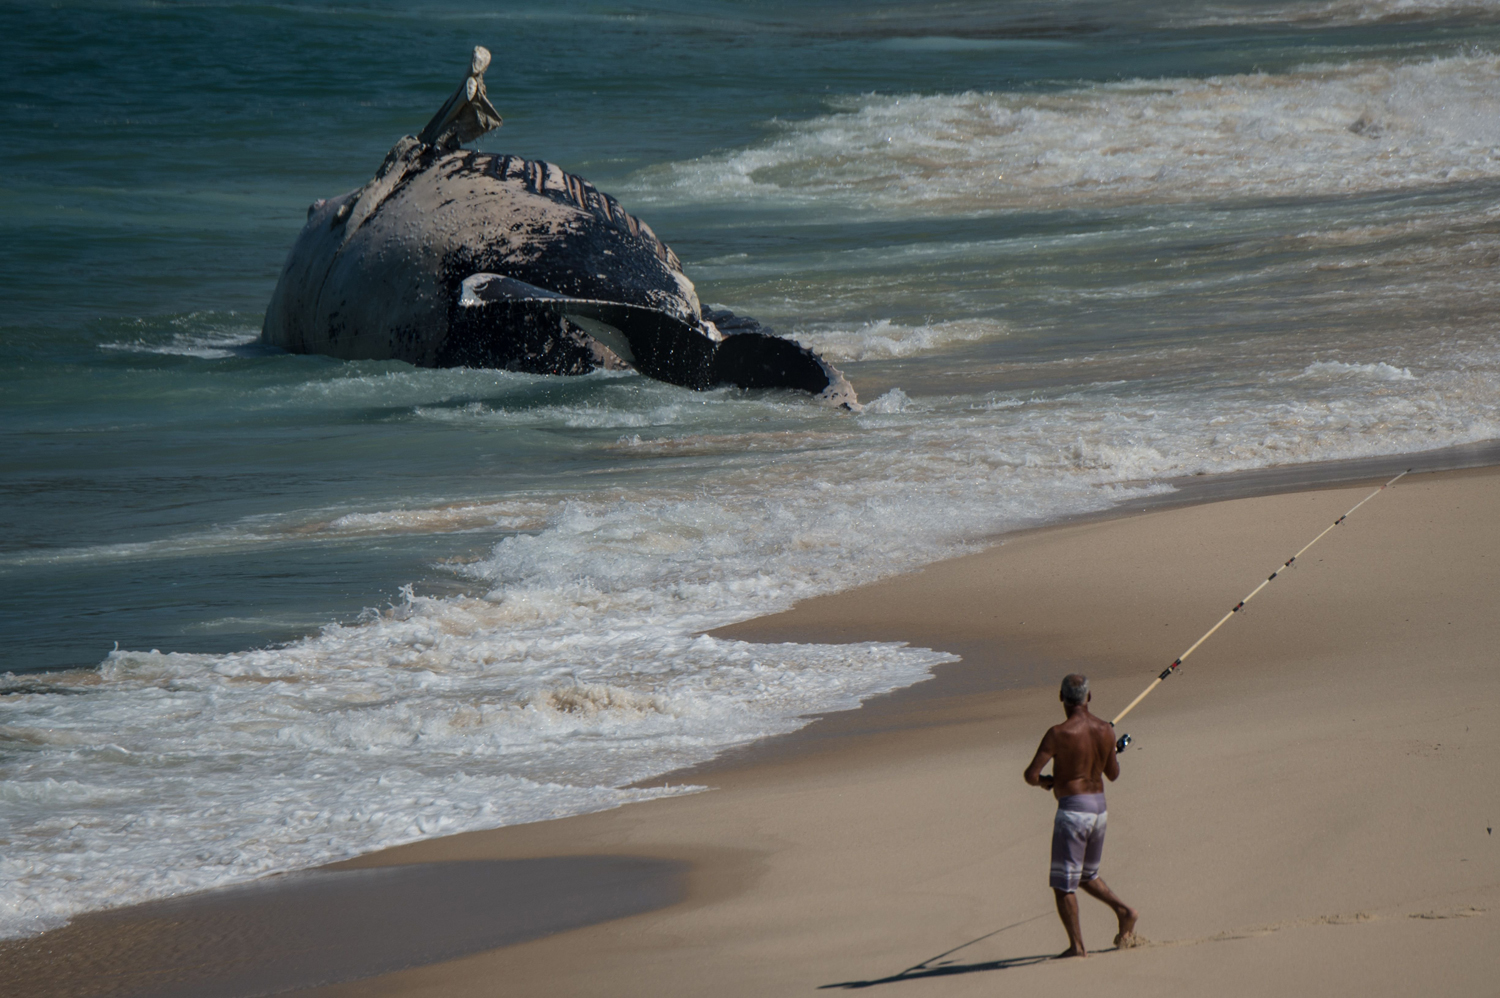 Aug. 11, 2014. A fisherman gets ready to cast his line near the body of a dead humpback whale washed ashore on Macumba beach in Rio de Janeiro, Brazil.